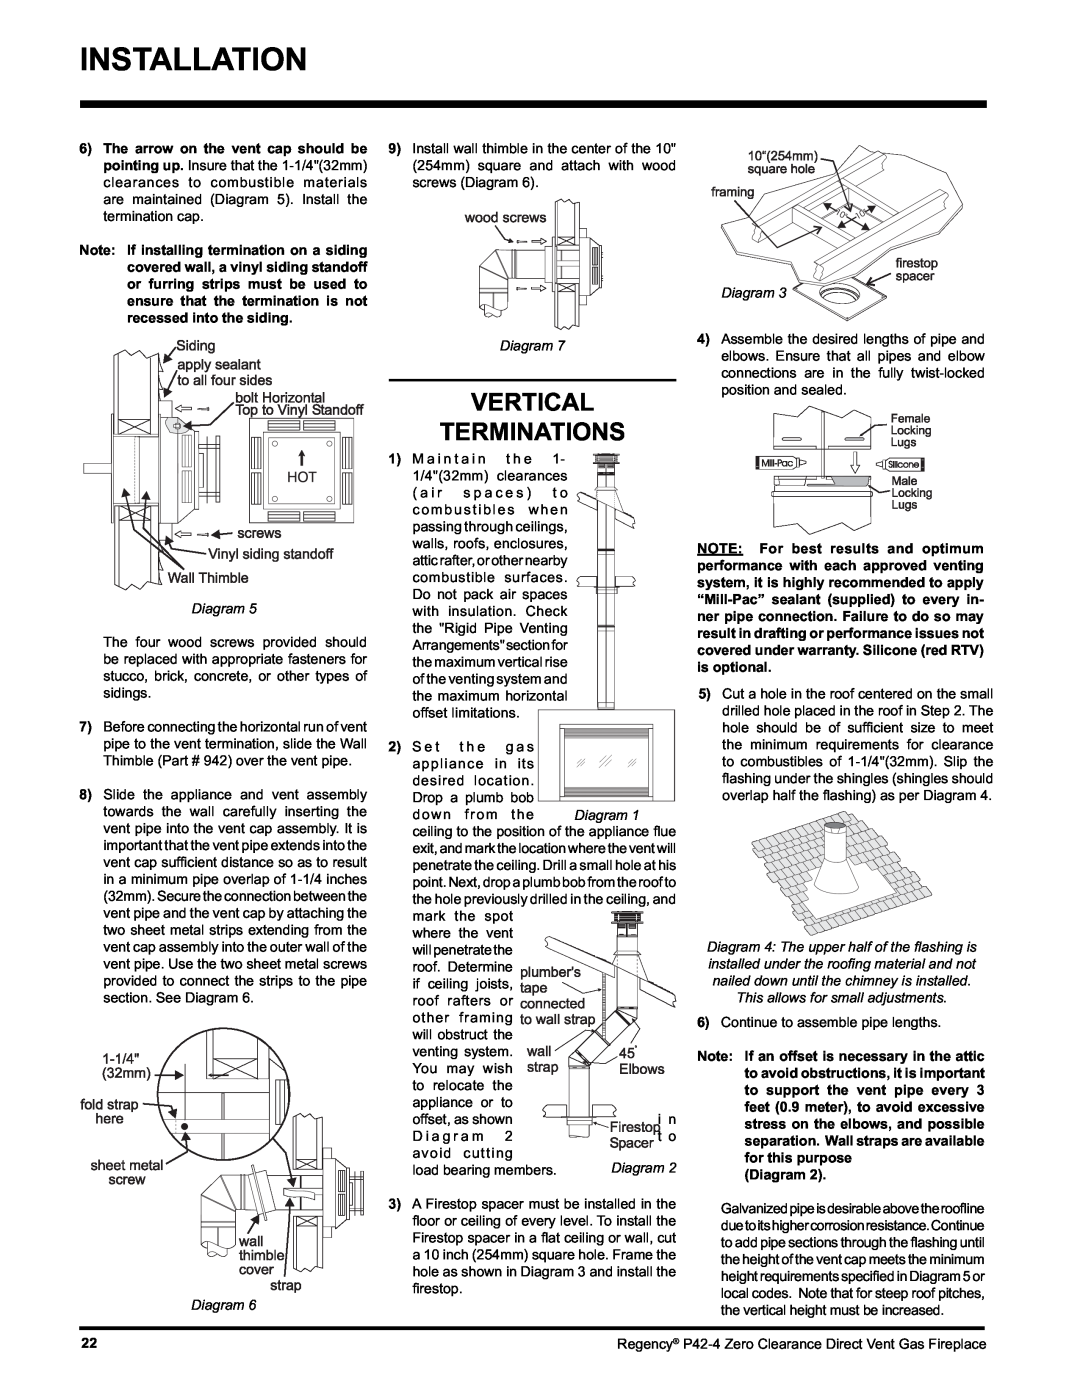 Regency P42-NG4, P42-LP4 installation manual Vertical Terminations, Diagram, This allows for small adjustments 